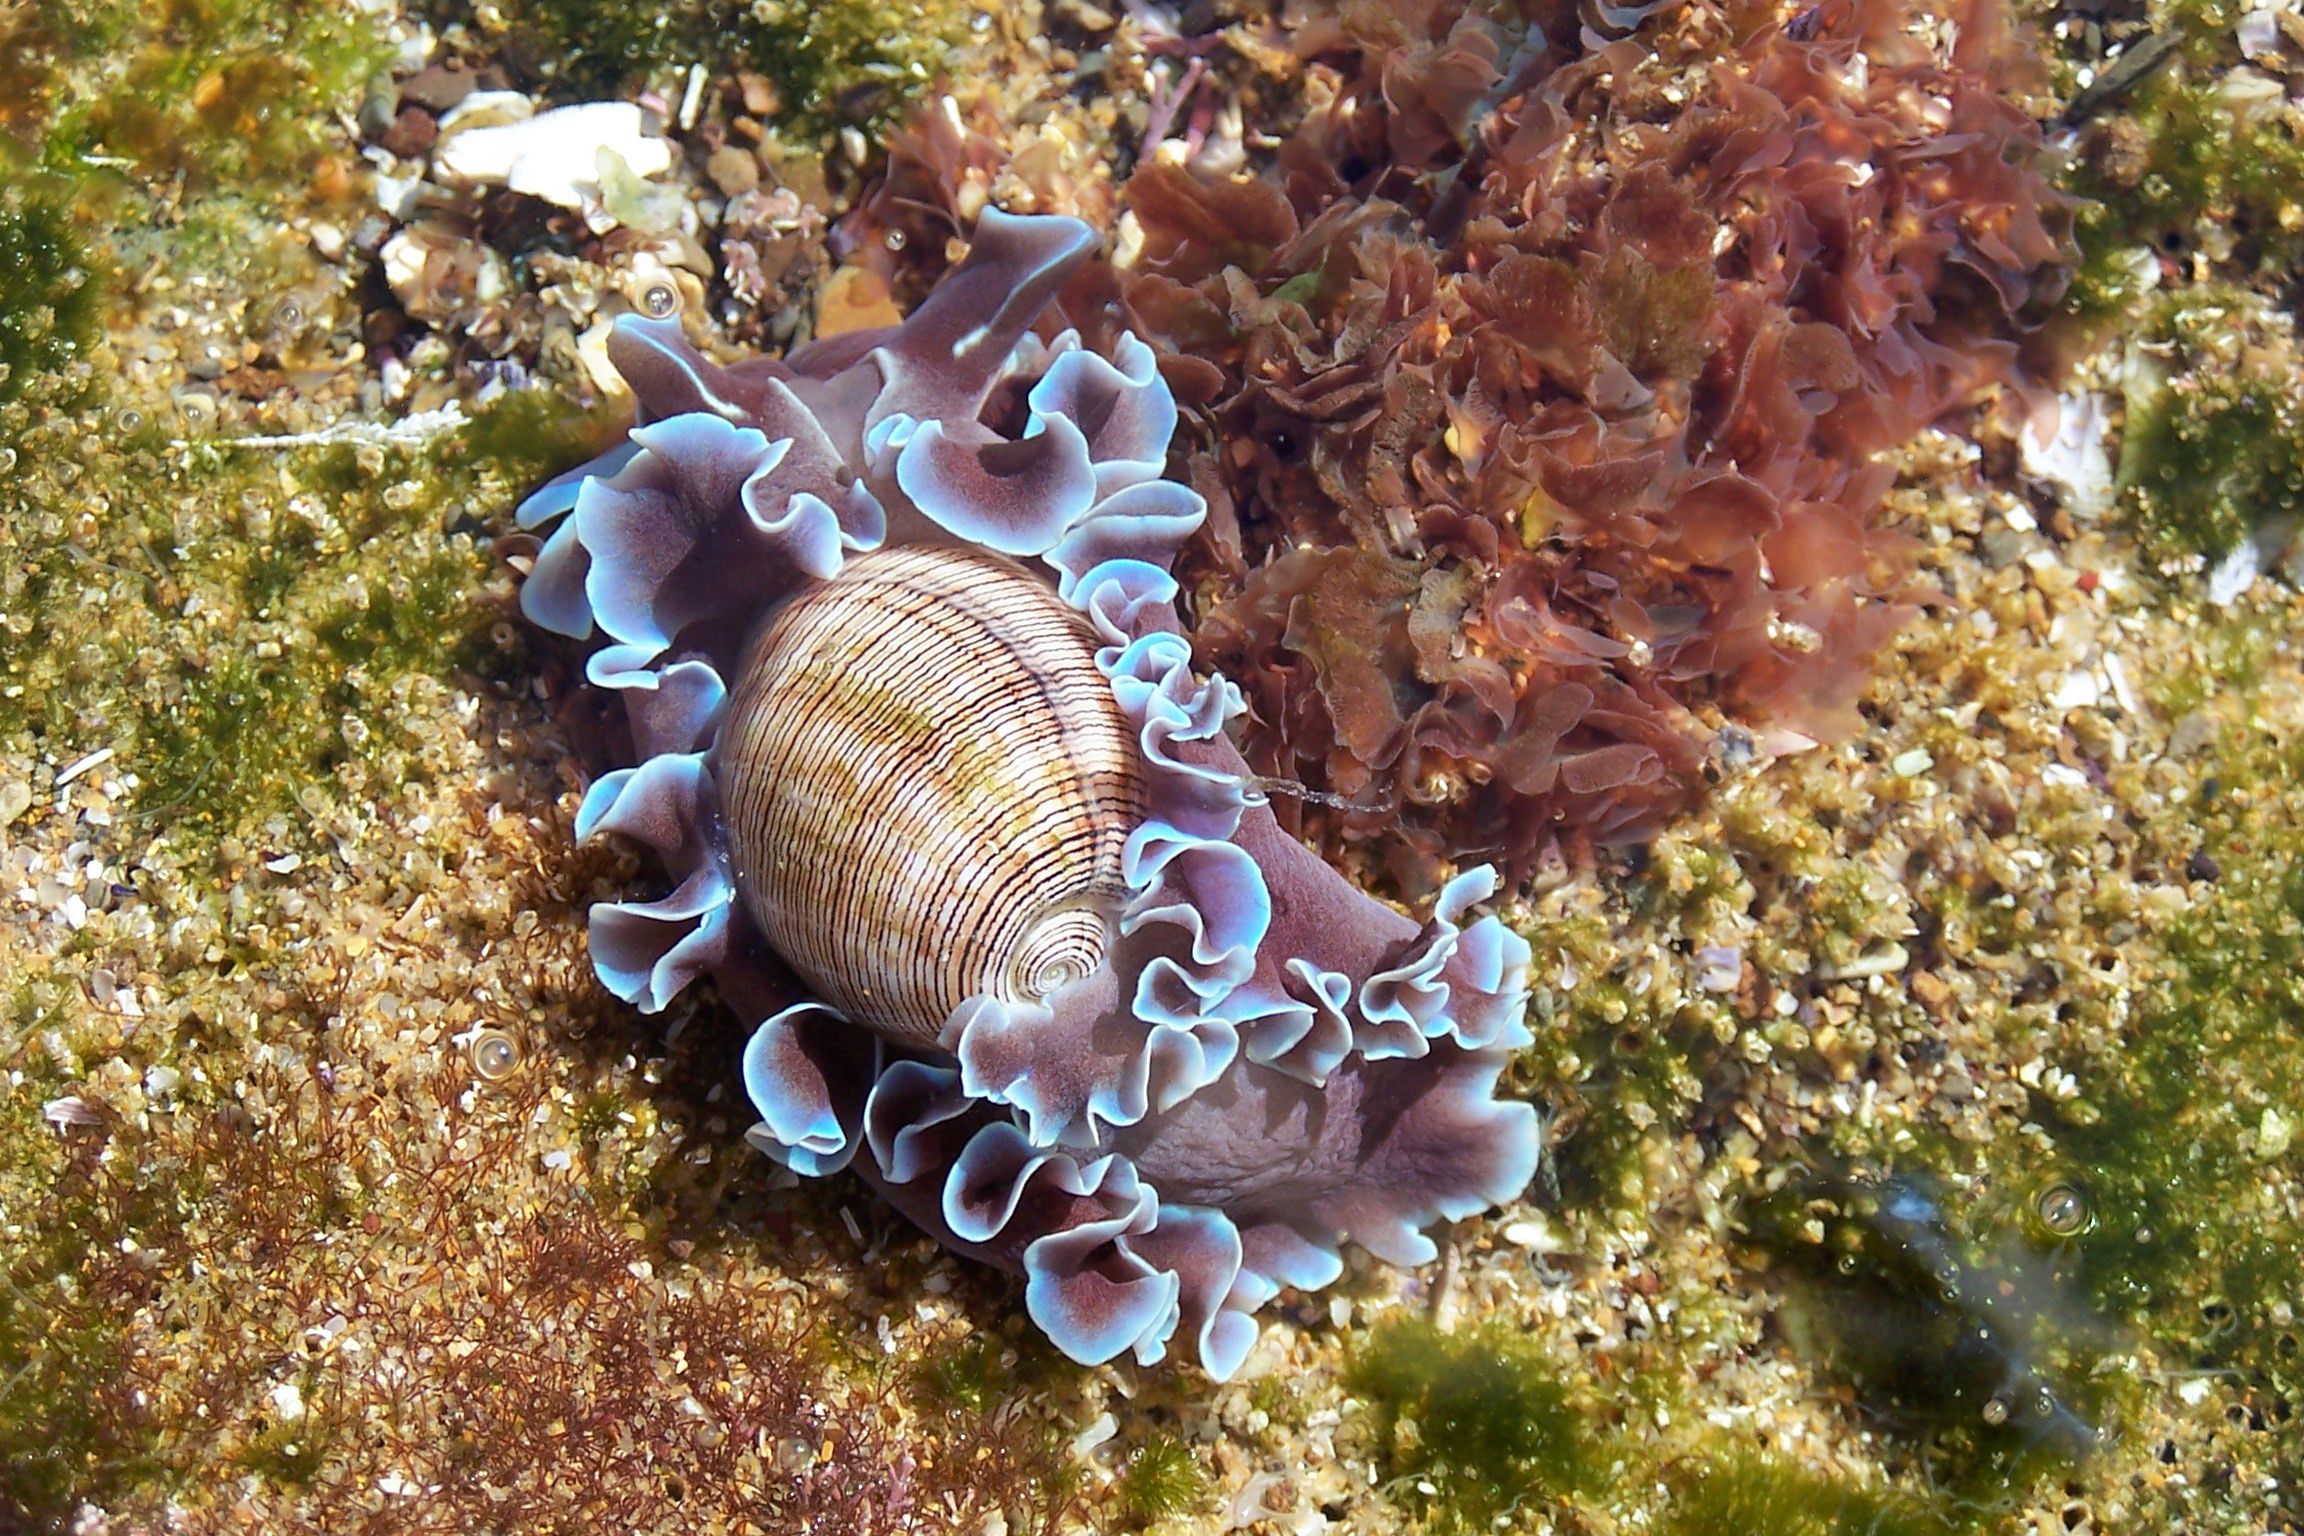 A sea snail with a spiral shell shape has a blue frilly body that spreads out around the shell.